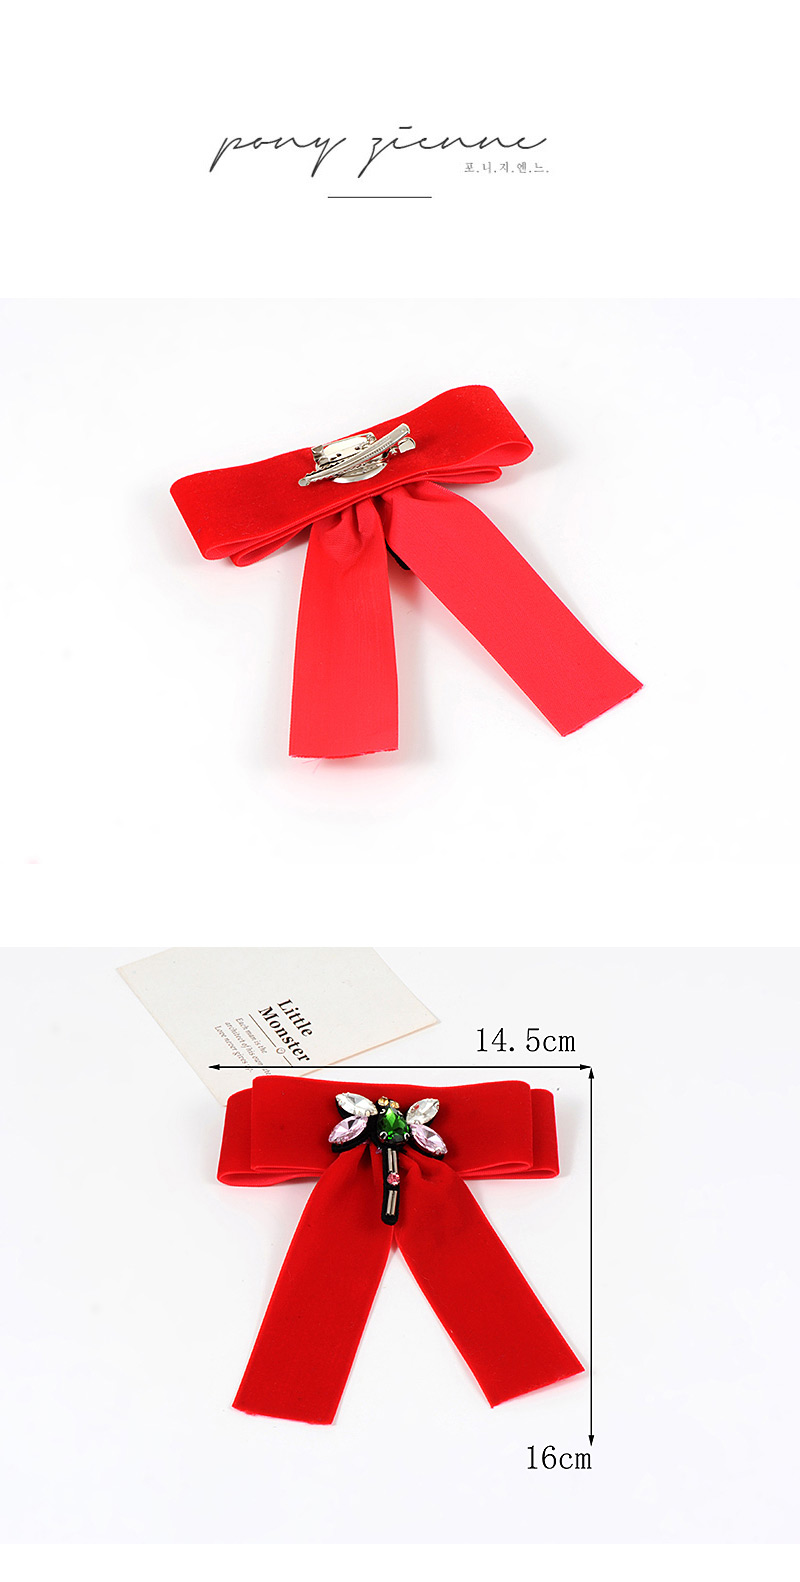 Fashion Red Dragonfly Decorated Bowknot Shape Brooch,Korean Brooches